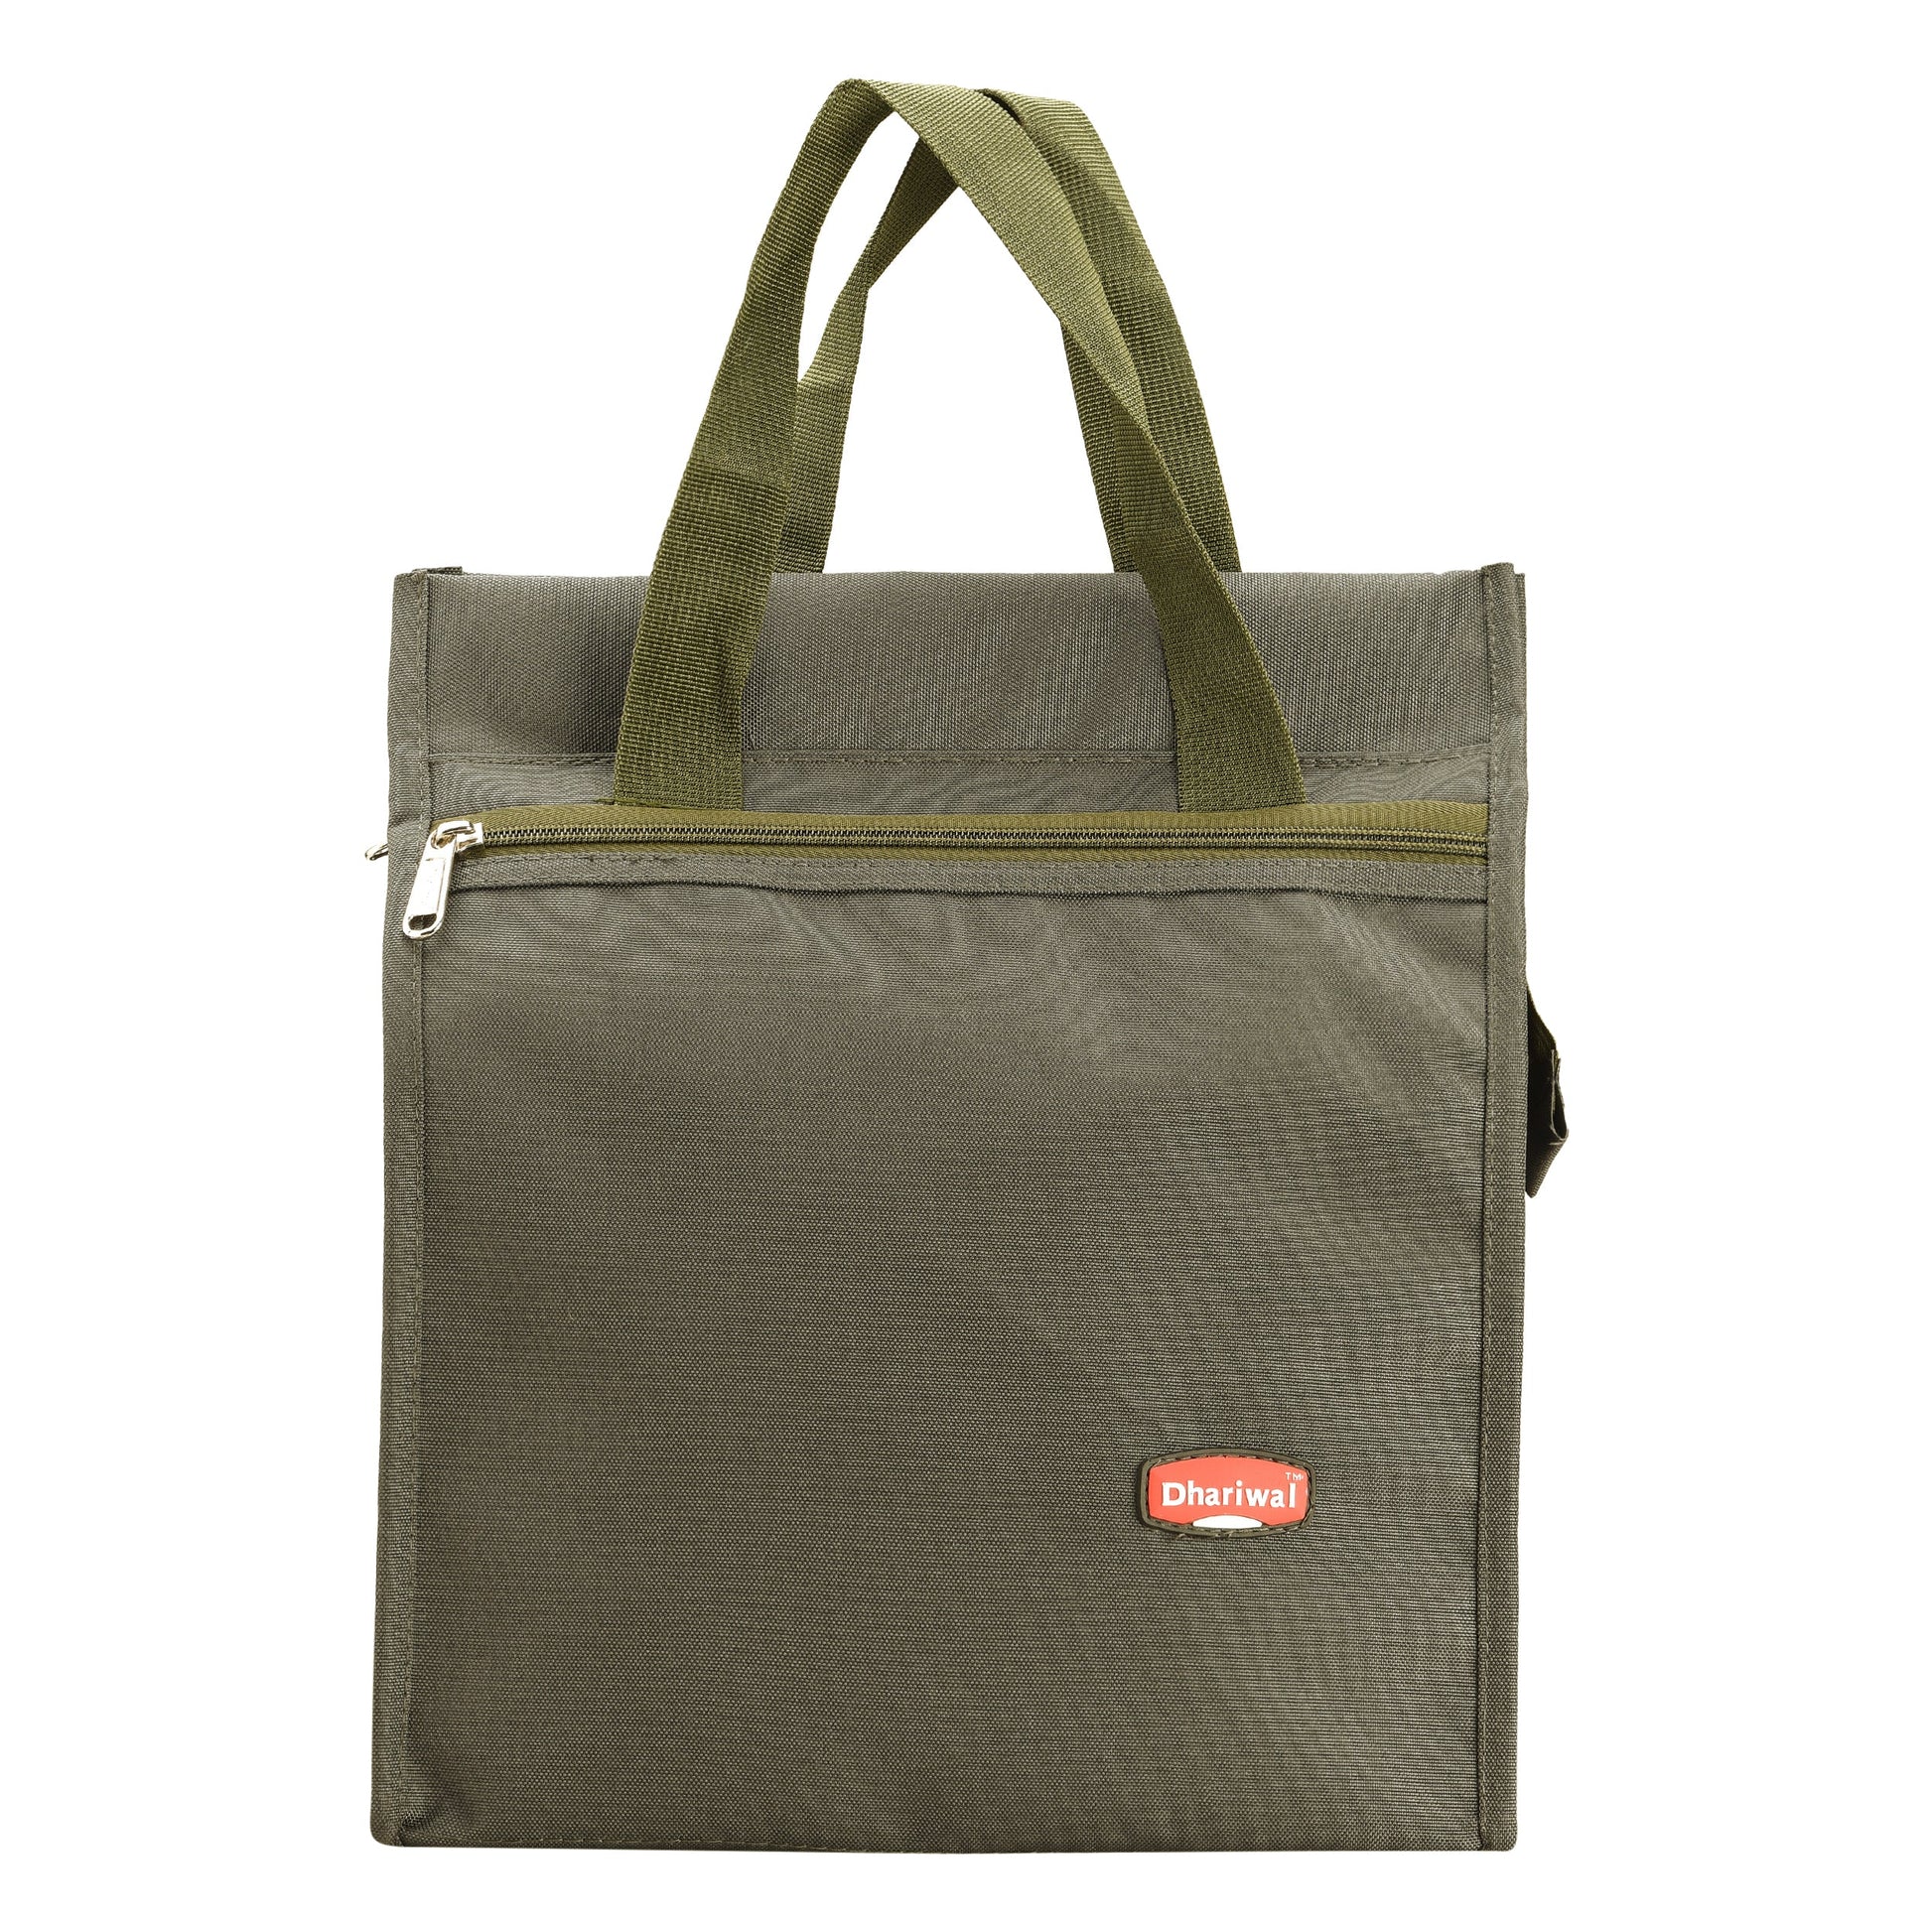 Thaili No.6 Tiffin Bag 16in x 13in x 6in TB-405 - Railway Running Staff - Extra Large Tiffin Bags Dhariwal Green 